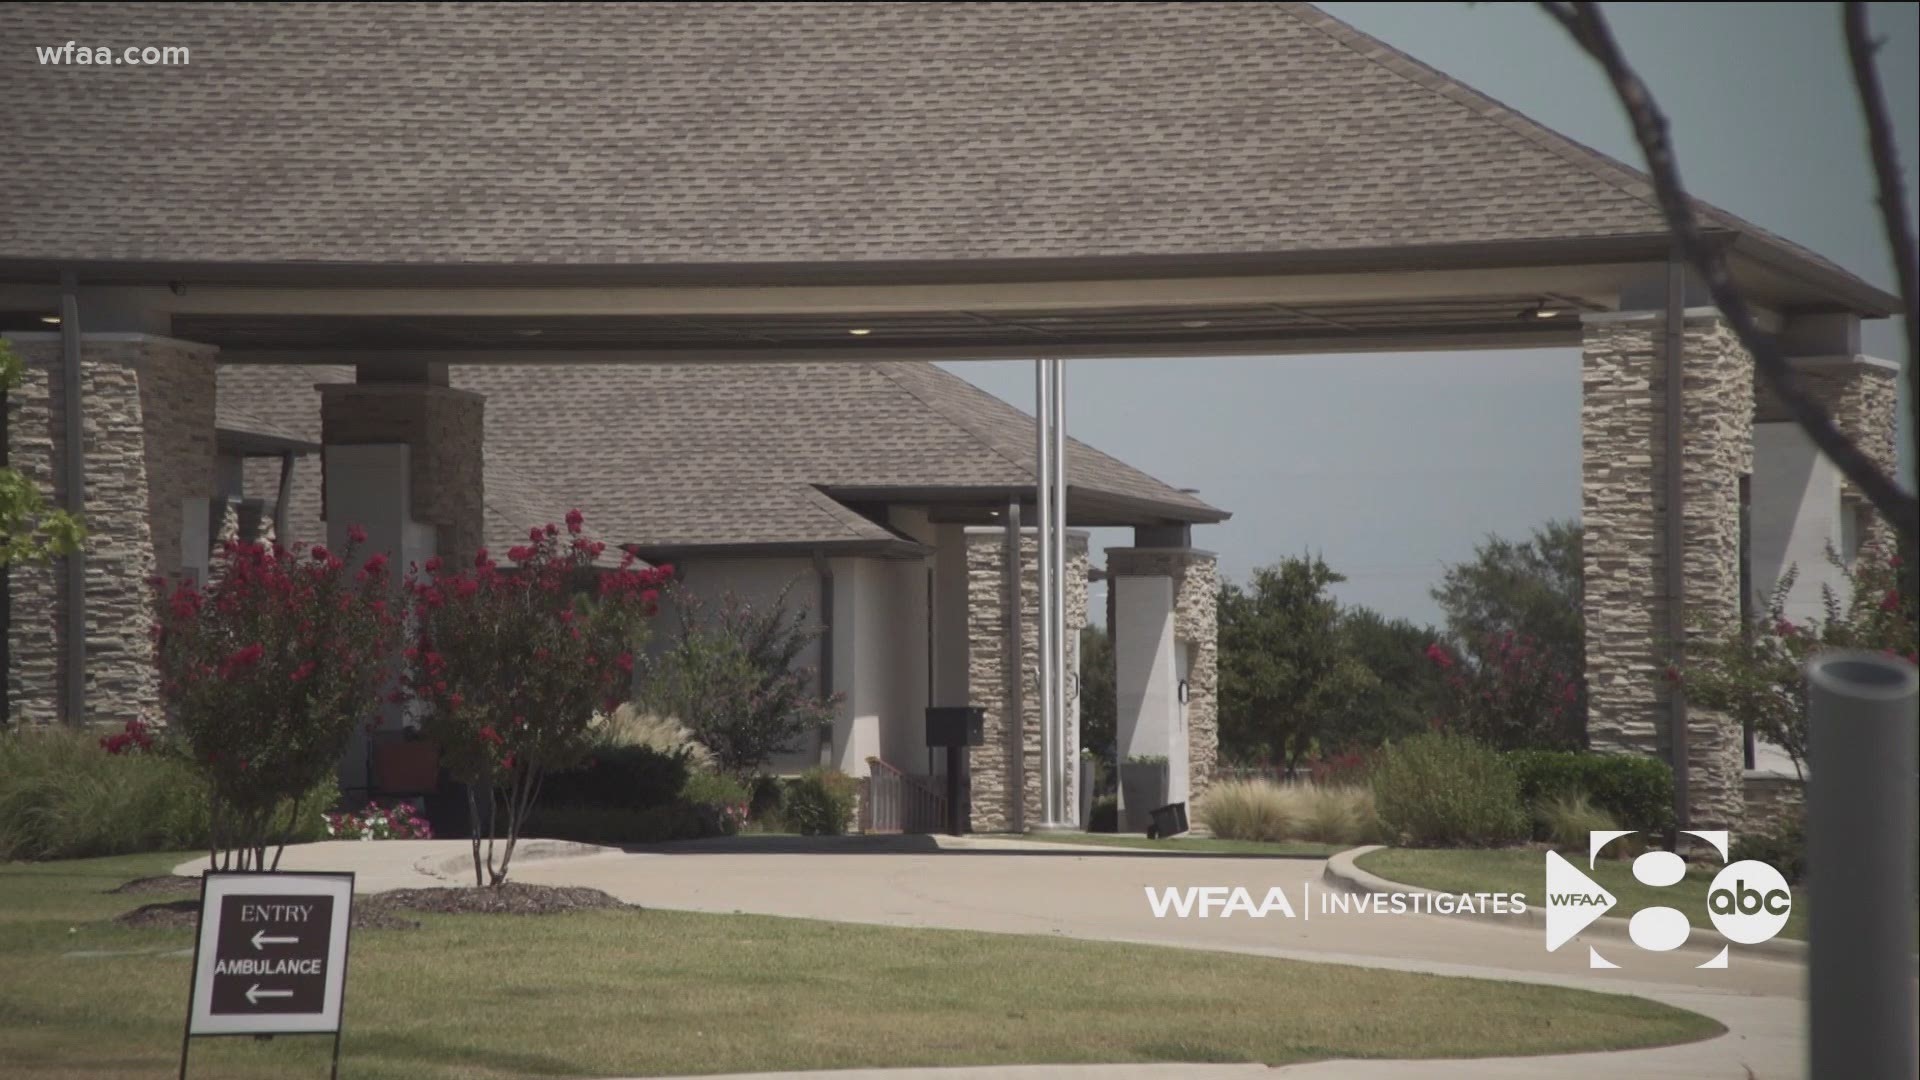 WFAA has learned that more than two dozen facilities in North Texas have opened designated COVID-19 wings.